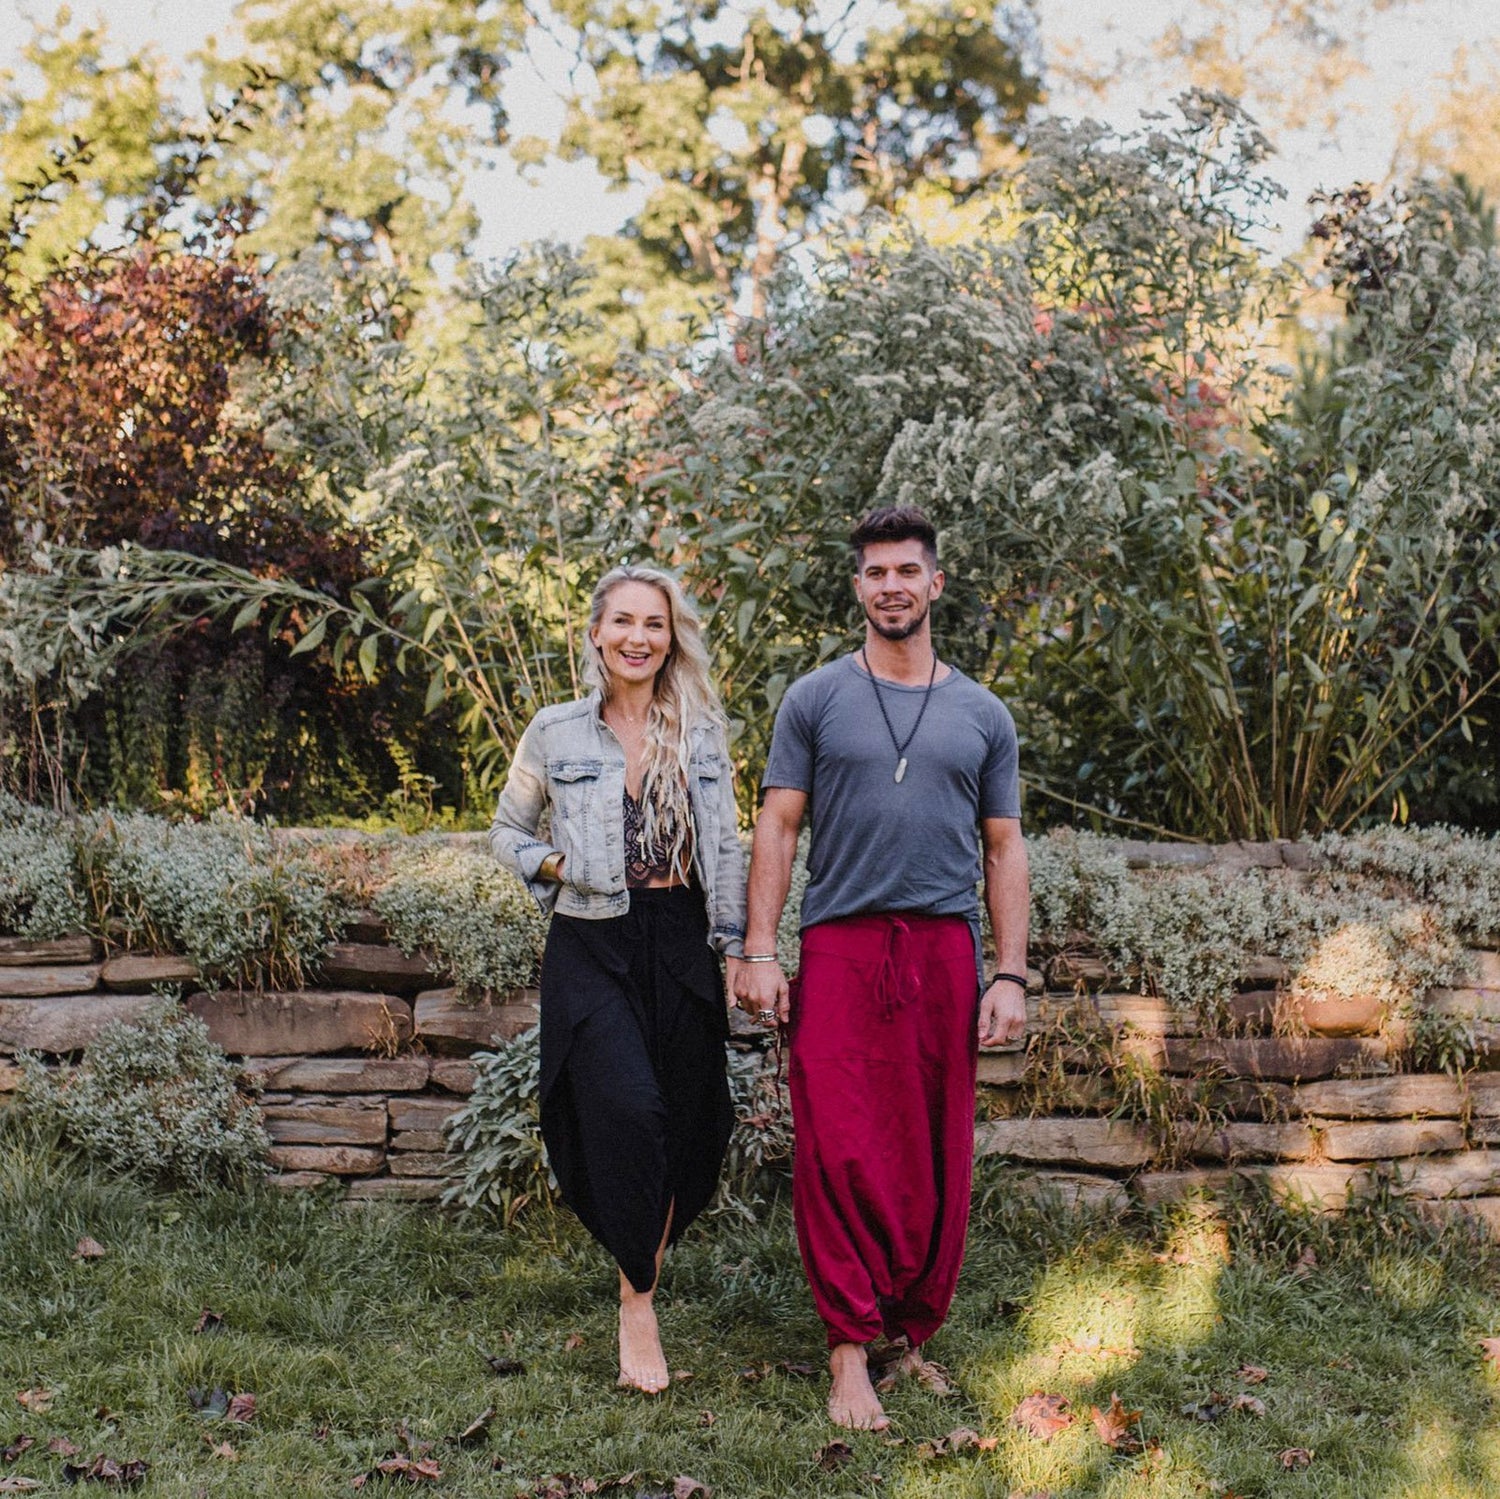 5 occasions that are perfect for harem pants - Buddha Pants